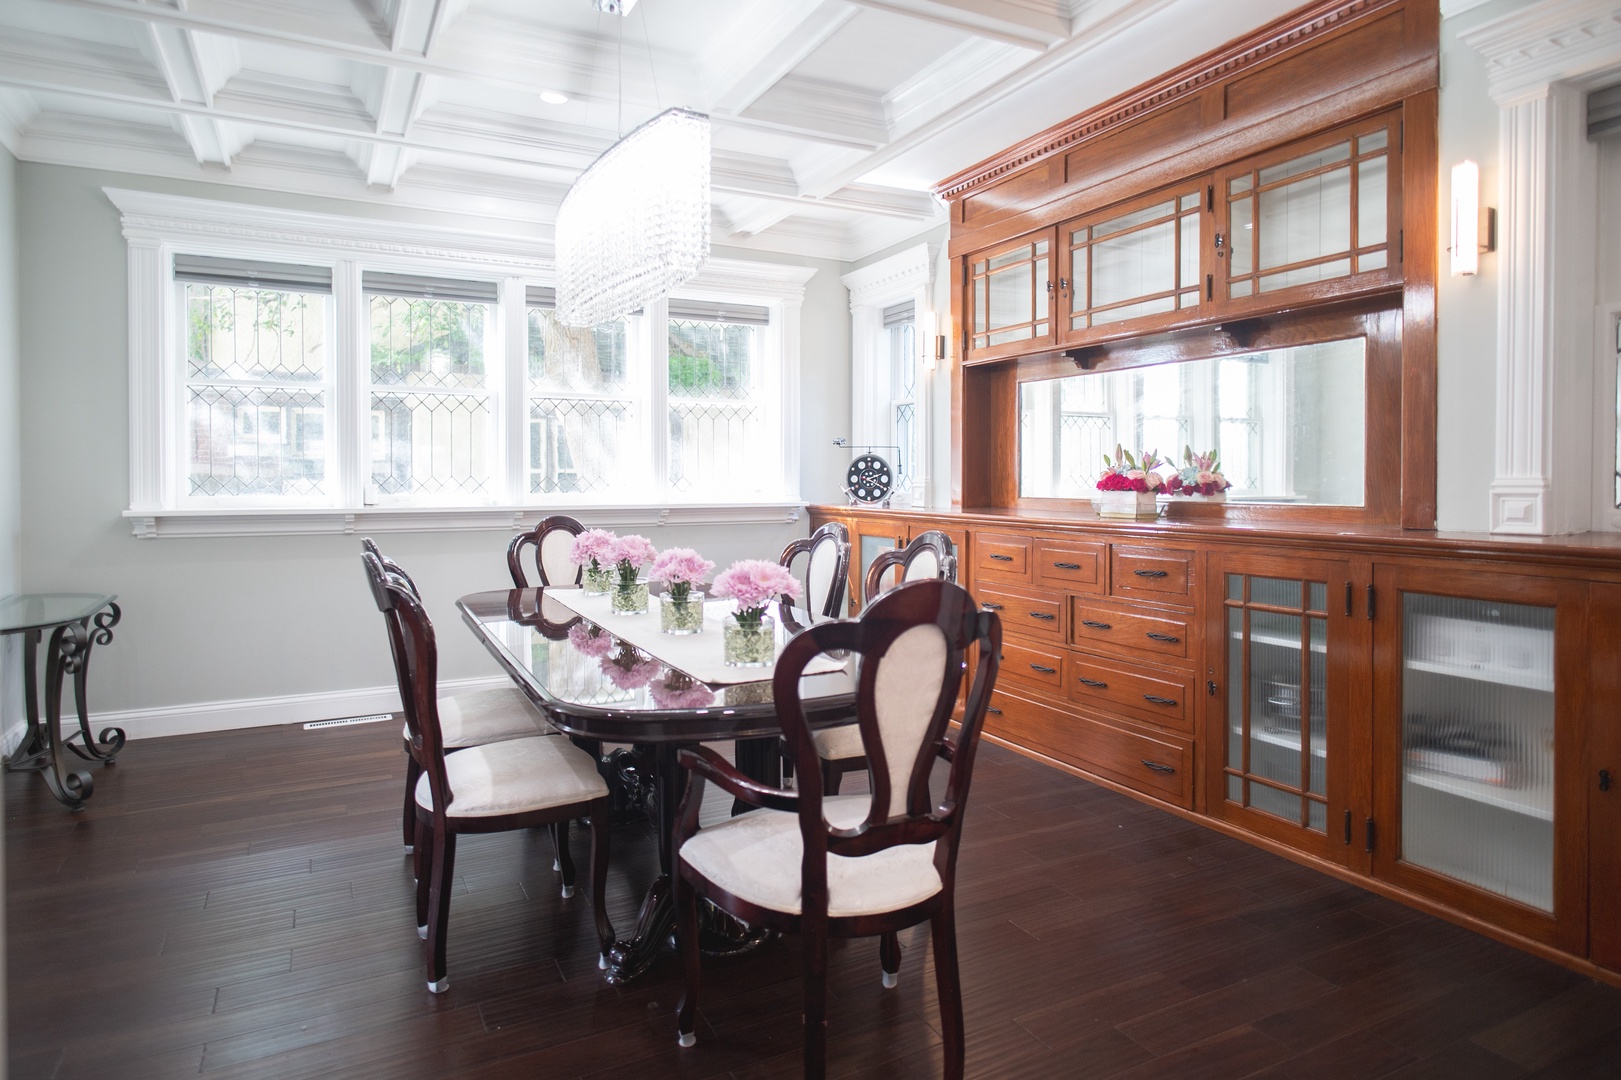 The main house’s elegant dining room offers seating for 6